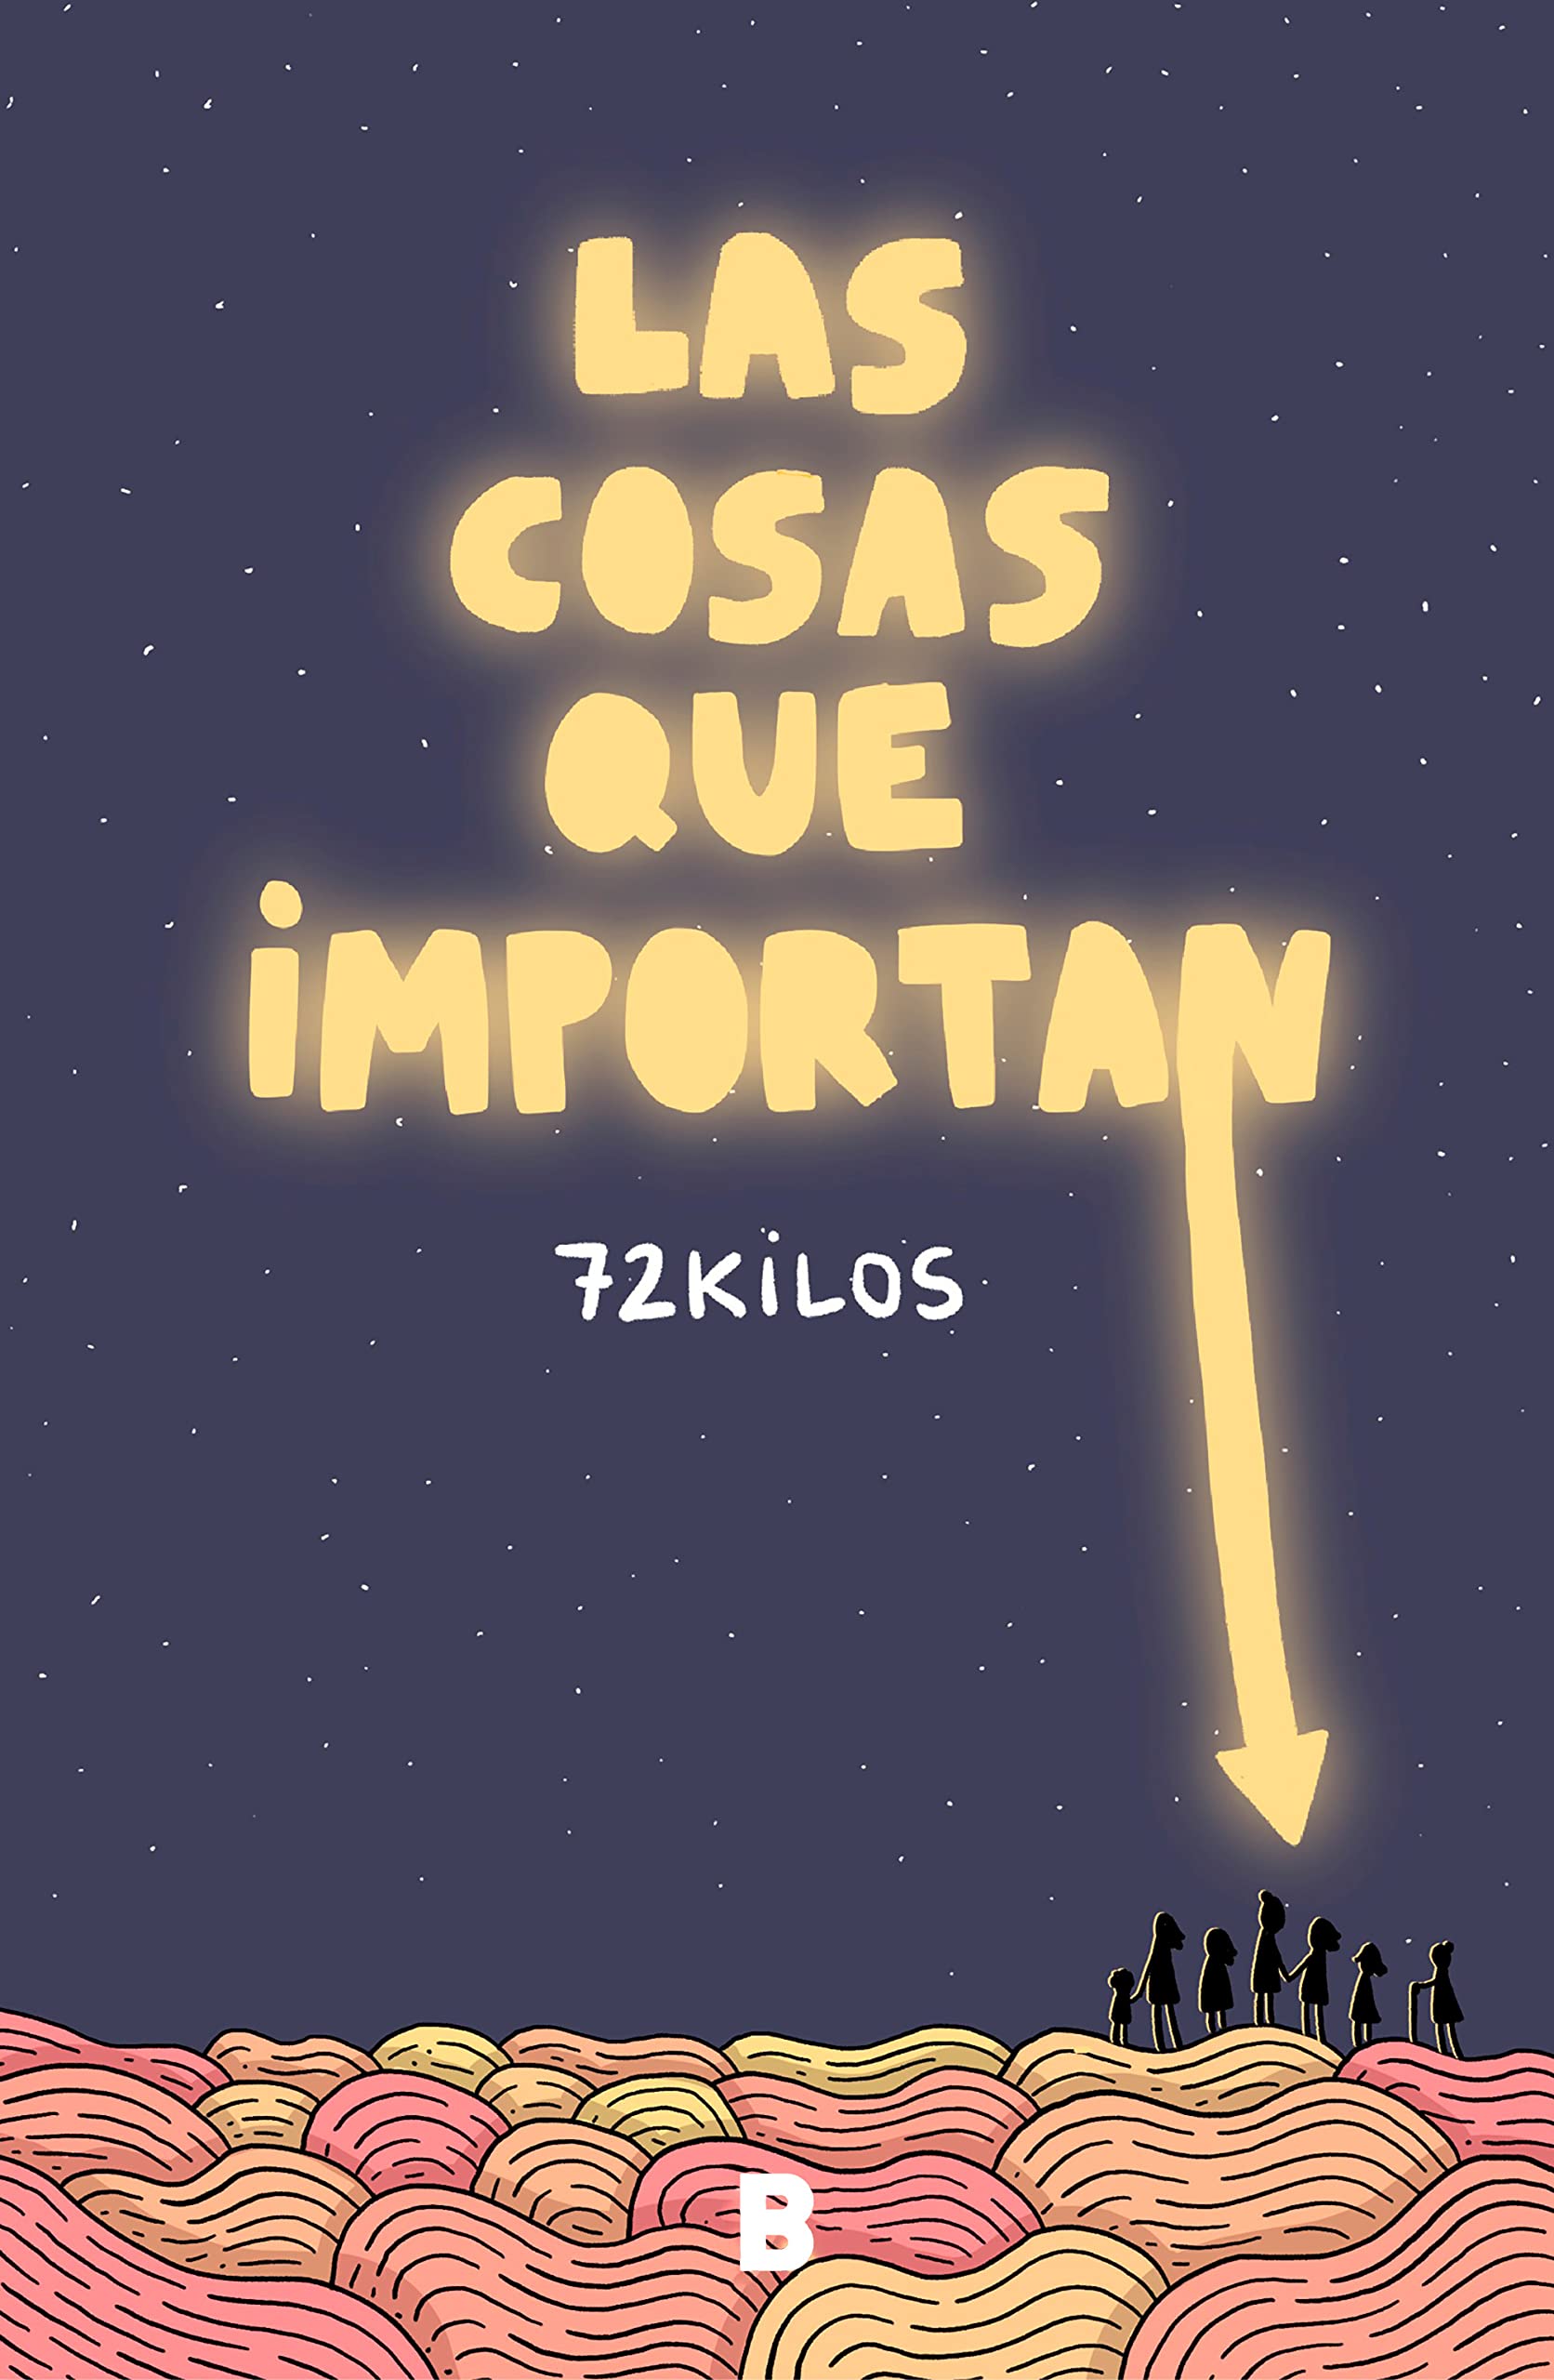 Las cosas que importan / The Things that Matter (Spanish Edition)